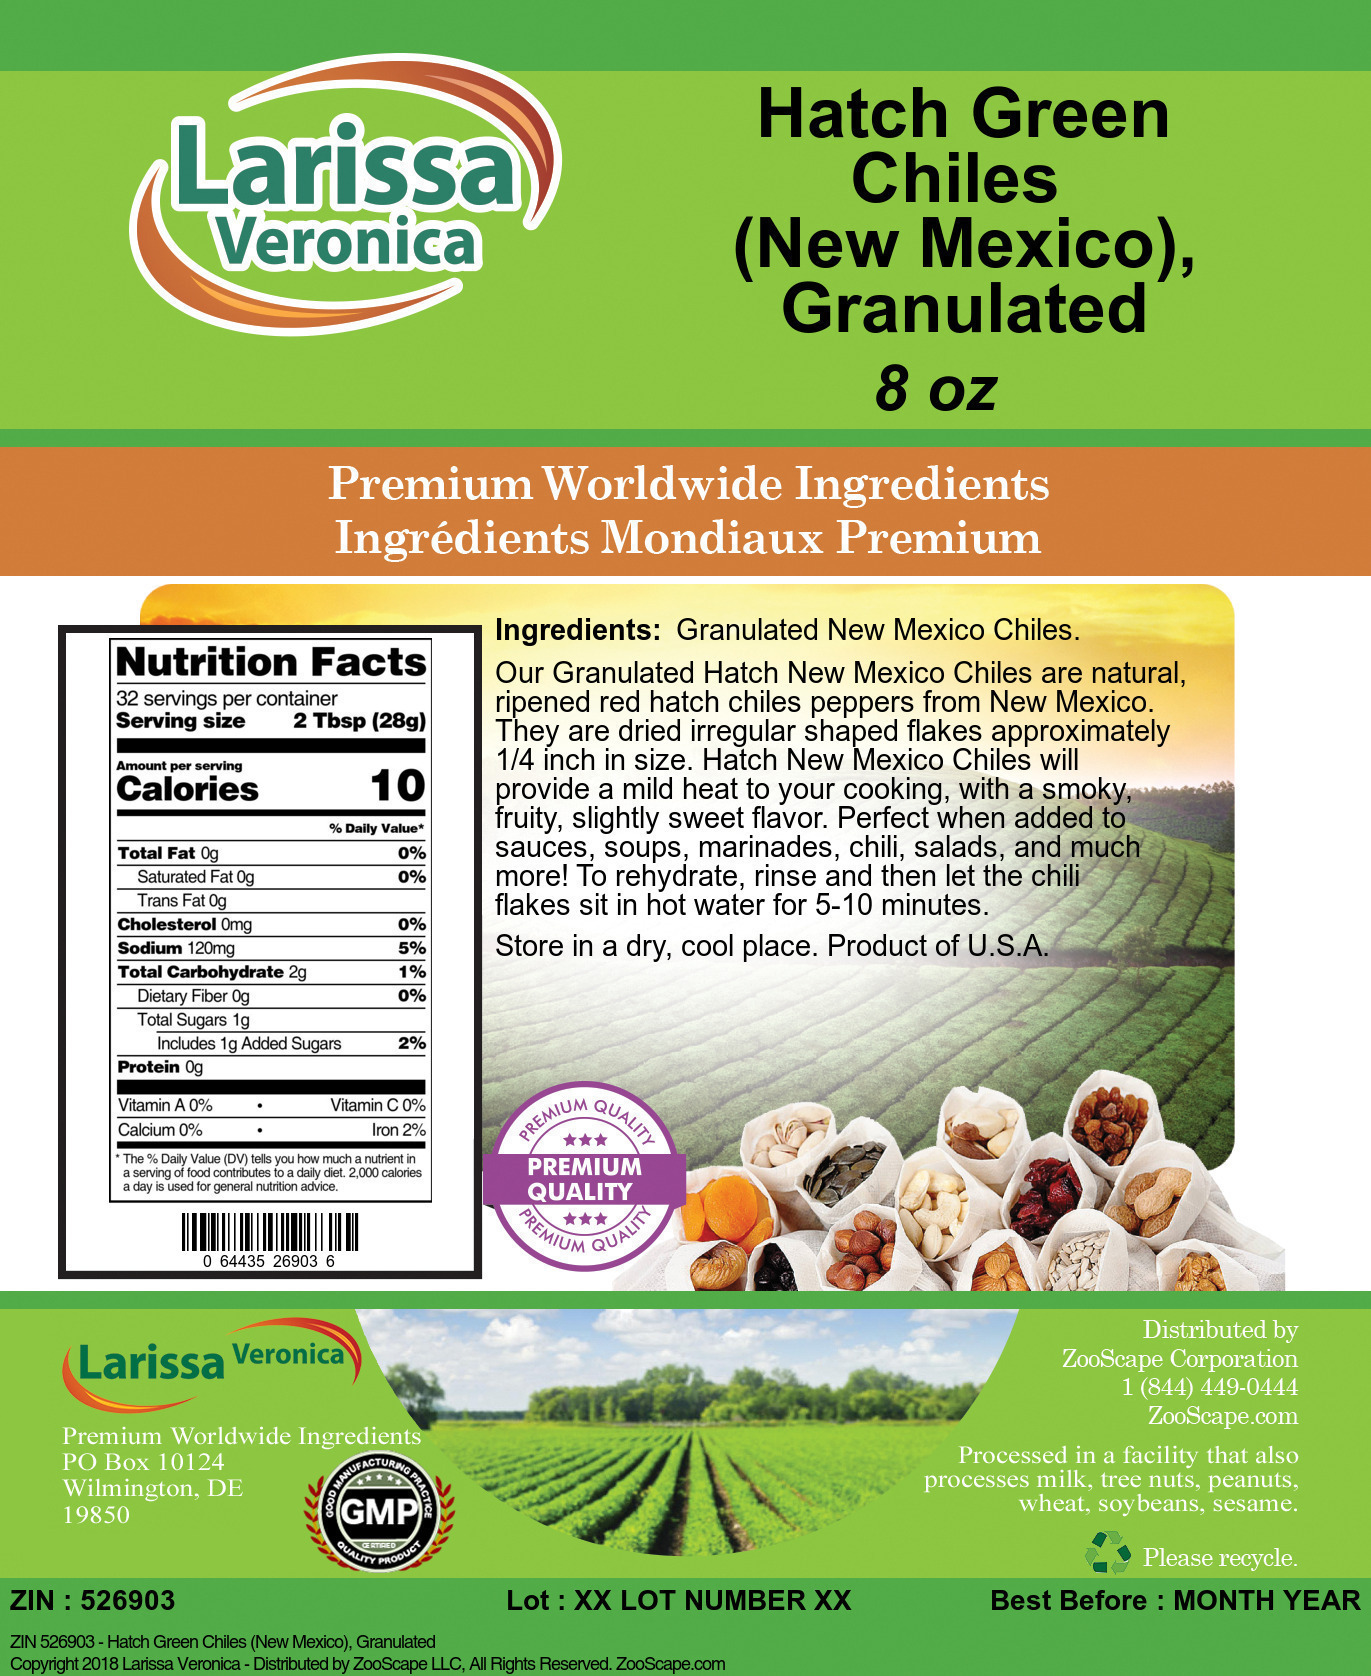 Hatch Green Chiles (New Mexico), Granulated - Label